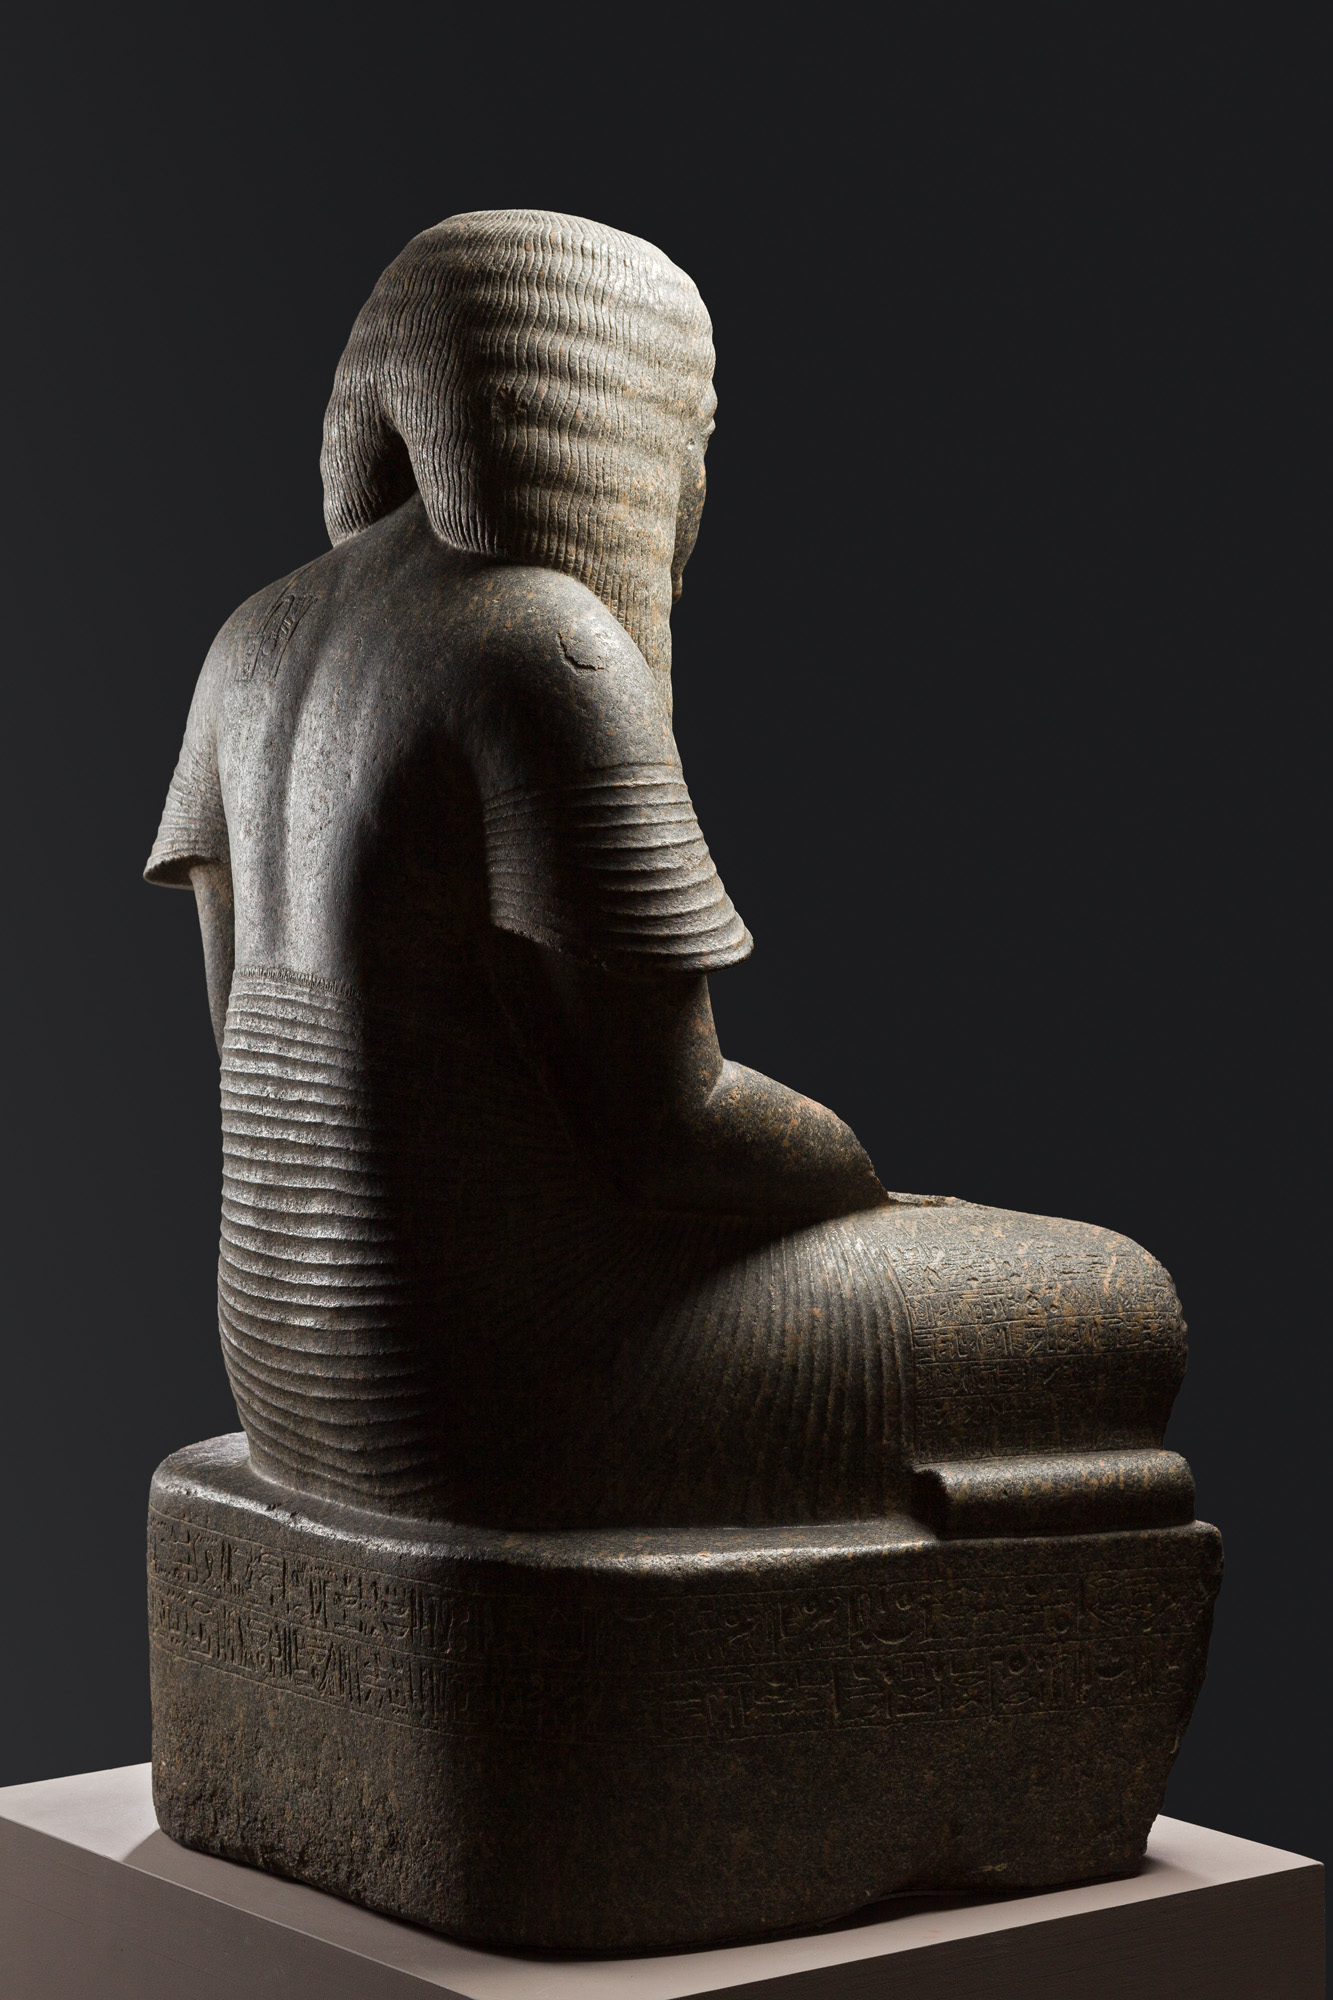 Horemheb as a Scribe of the King